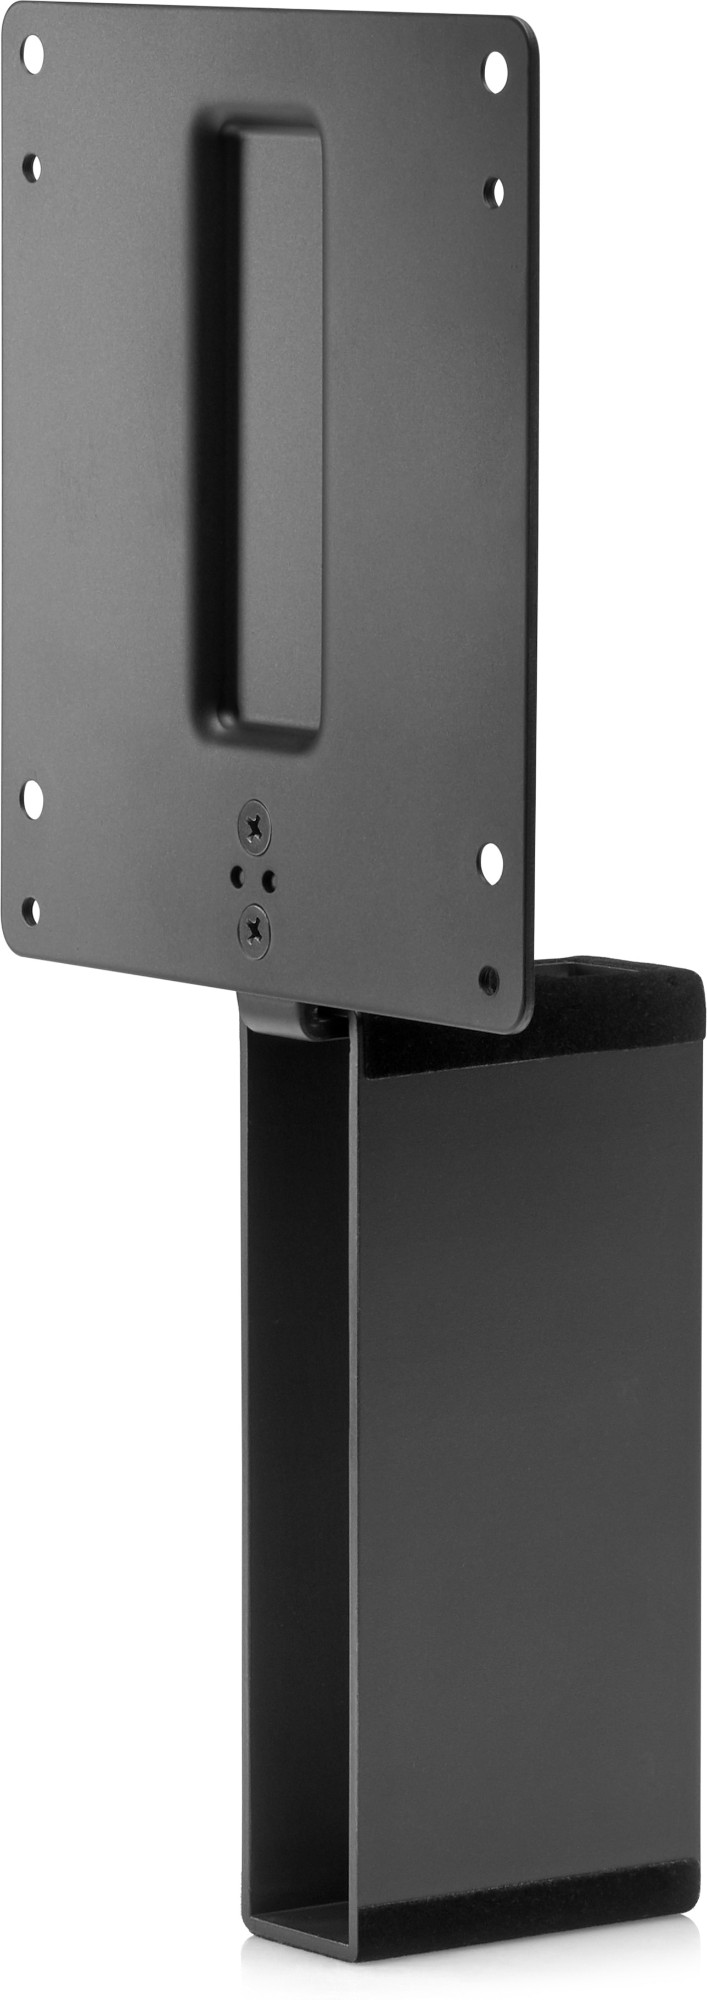 Mounting Kits - Mounts & Stands - Monitors & Stands - Peripherals